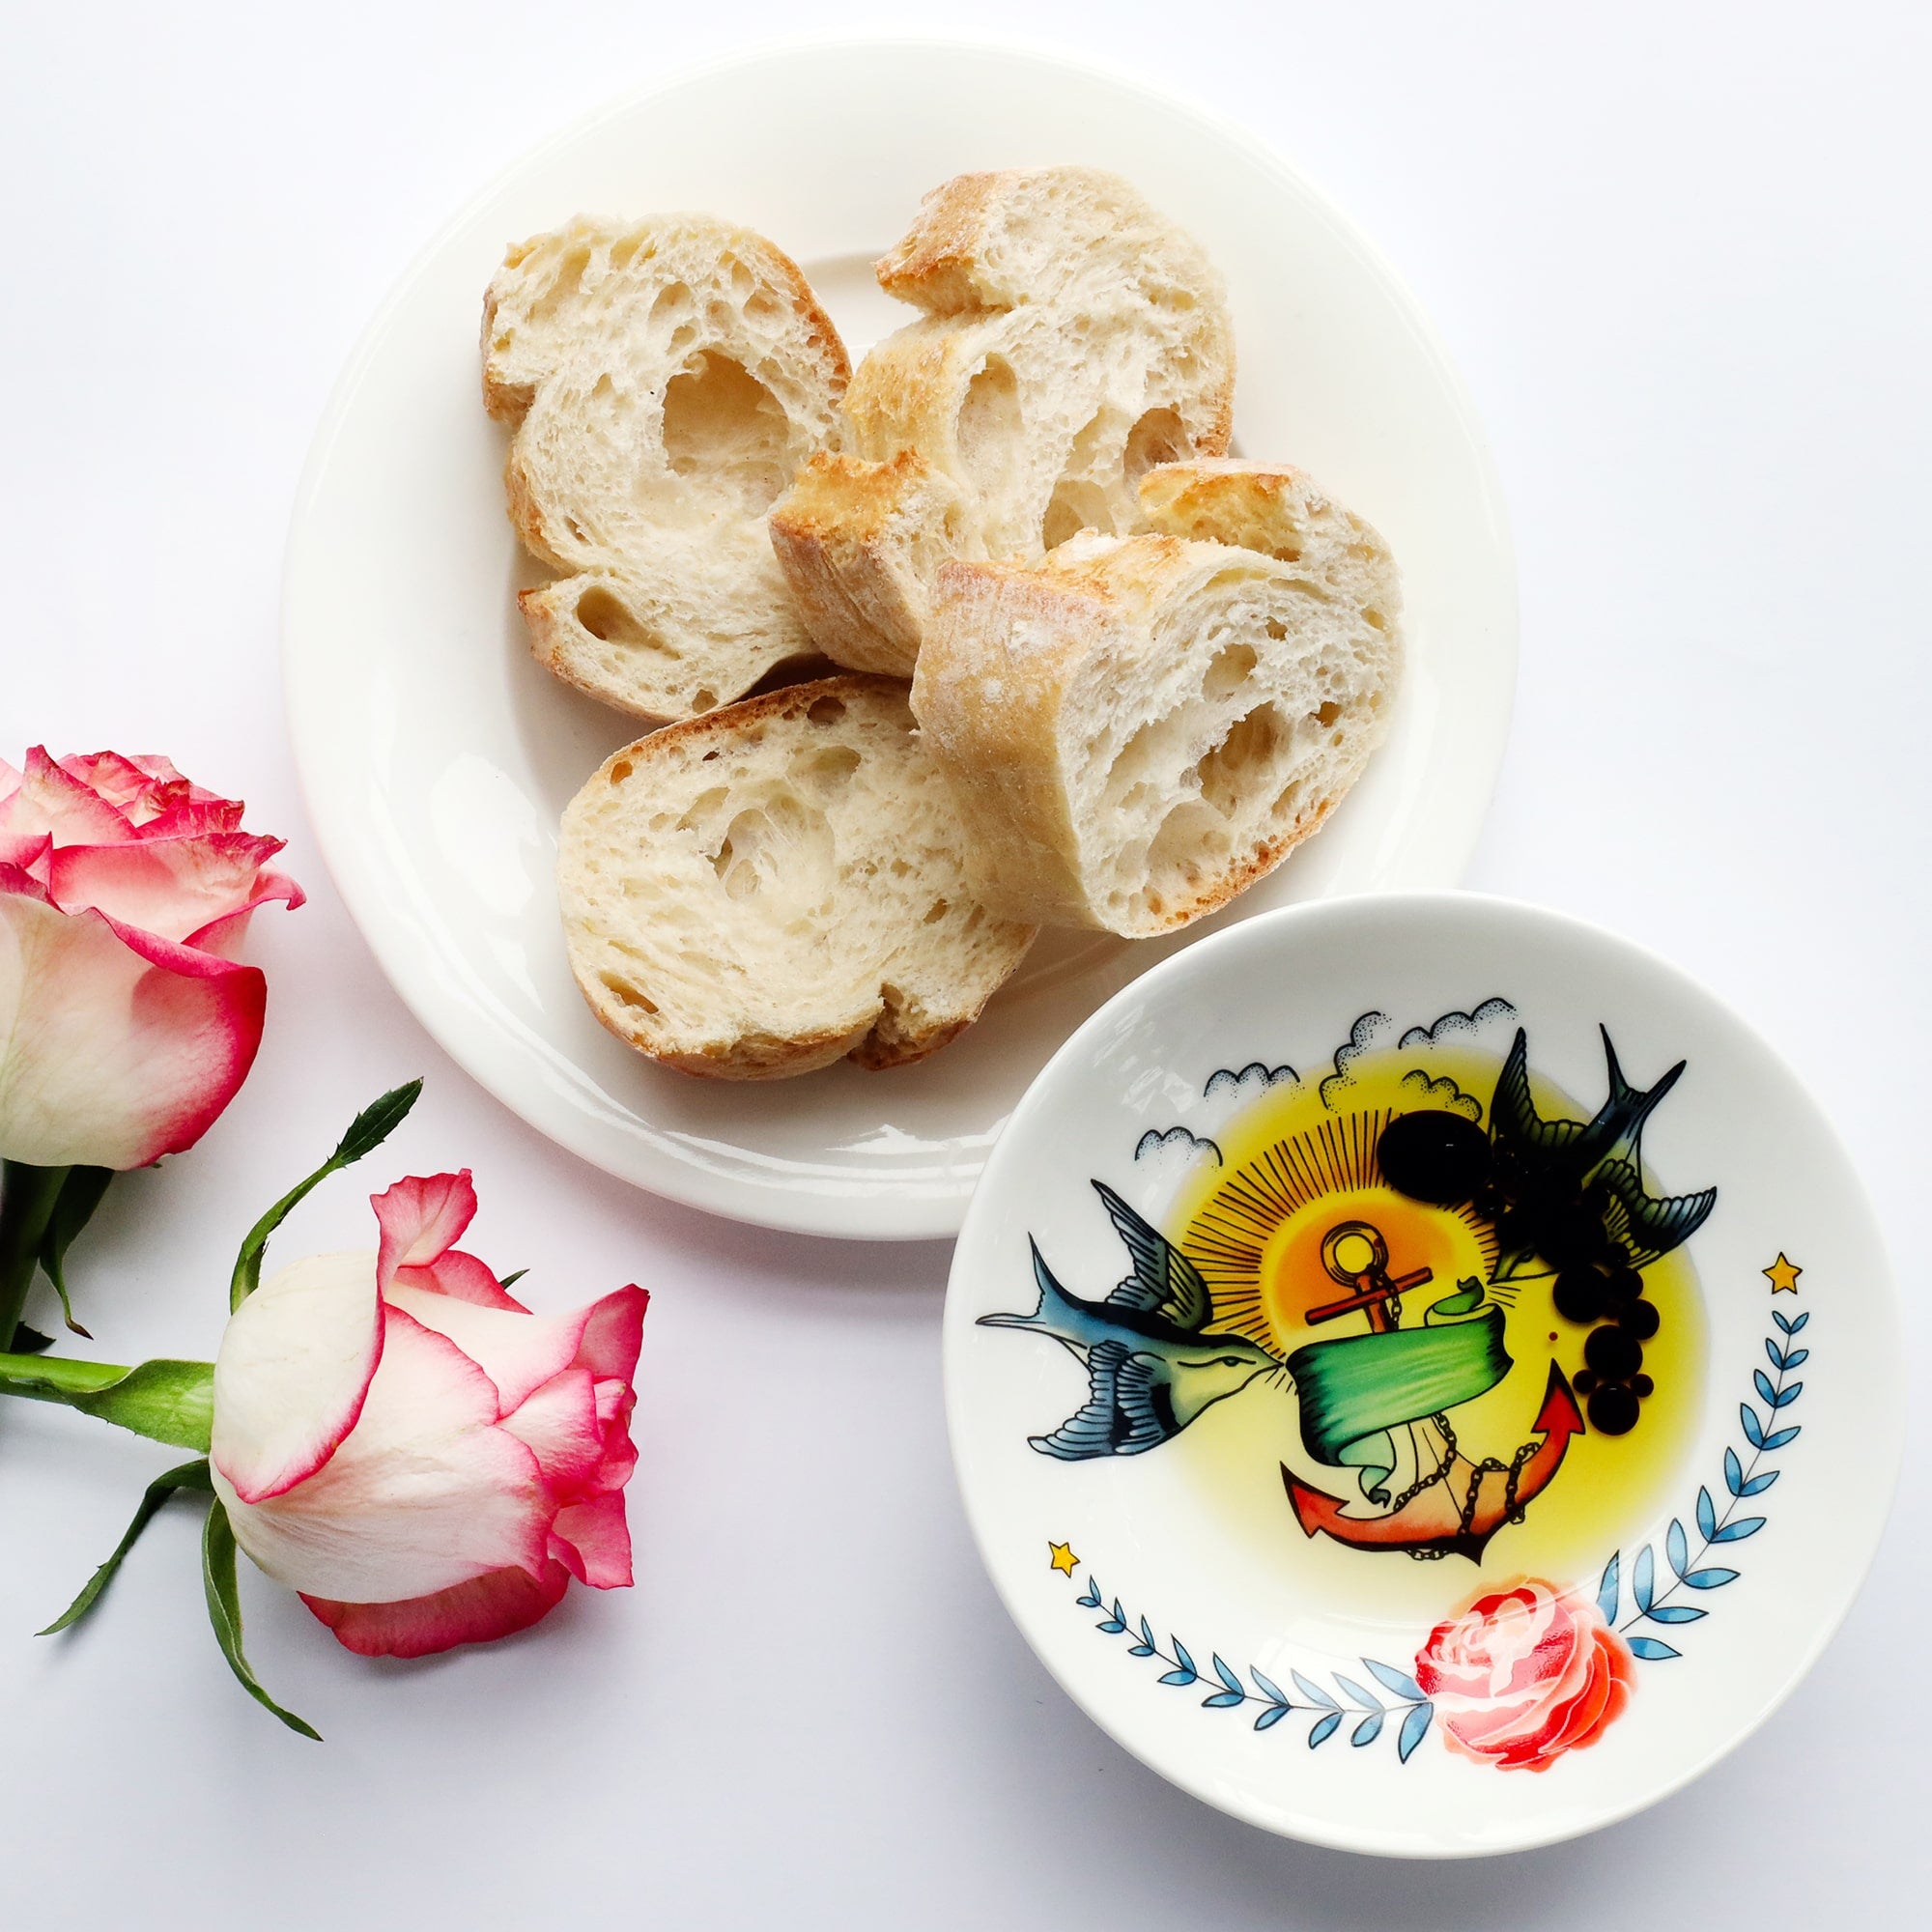 Nibbles dish with tattoo inspired design of swallows, anchor and rose, filled with olive oil and balsamic vinegar. There is a plate of bread to the side and 2 pink and white roses.